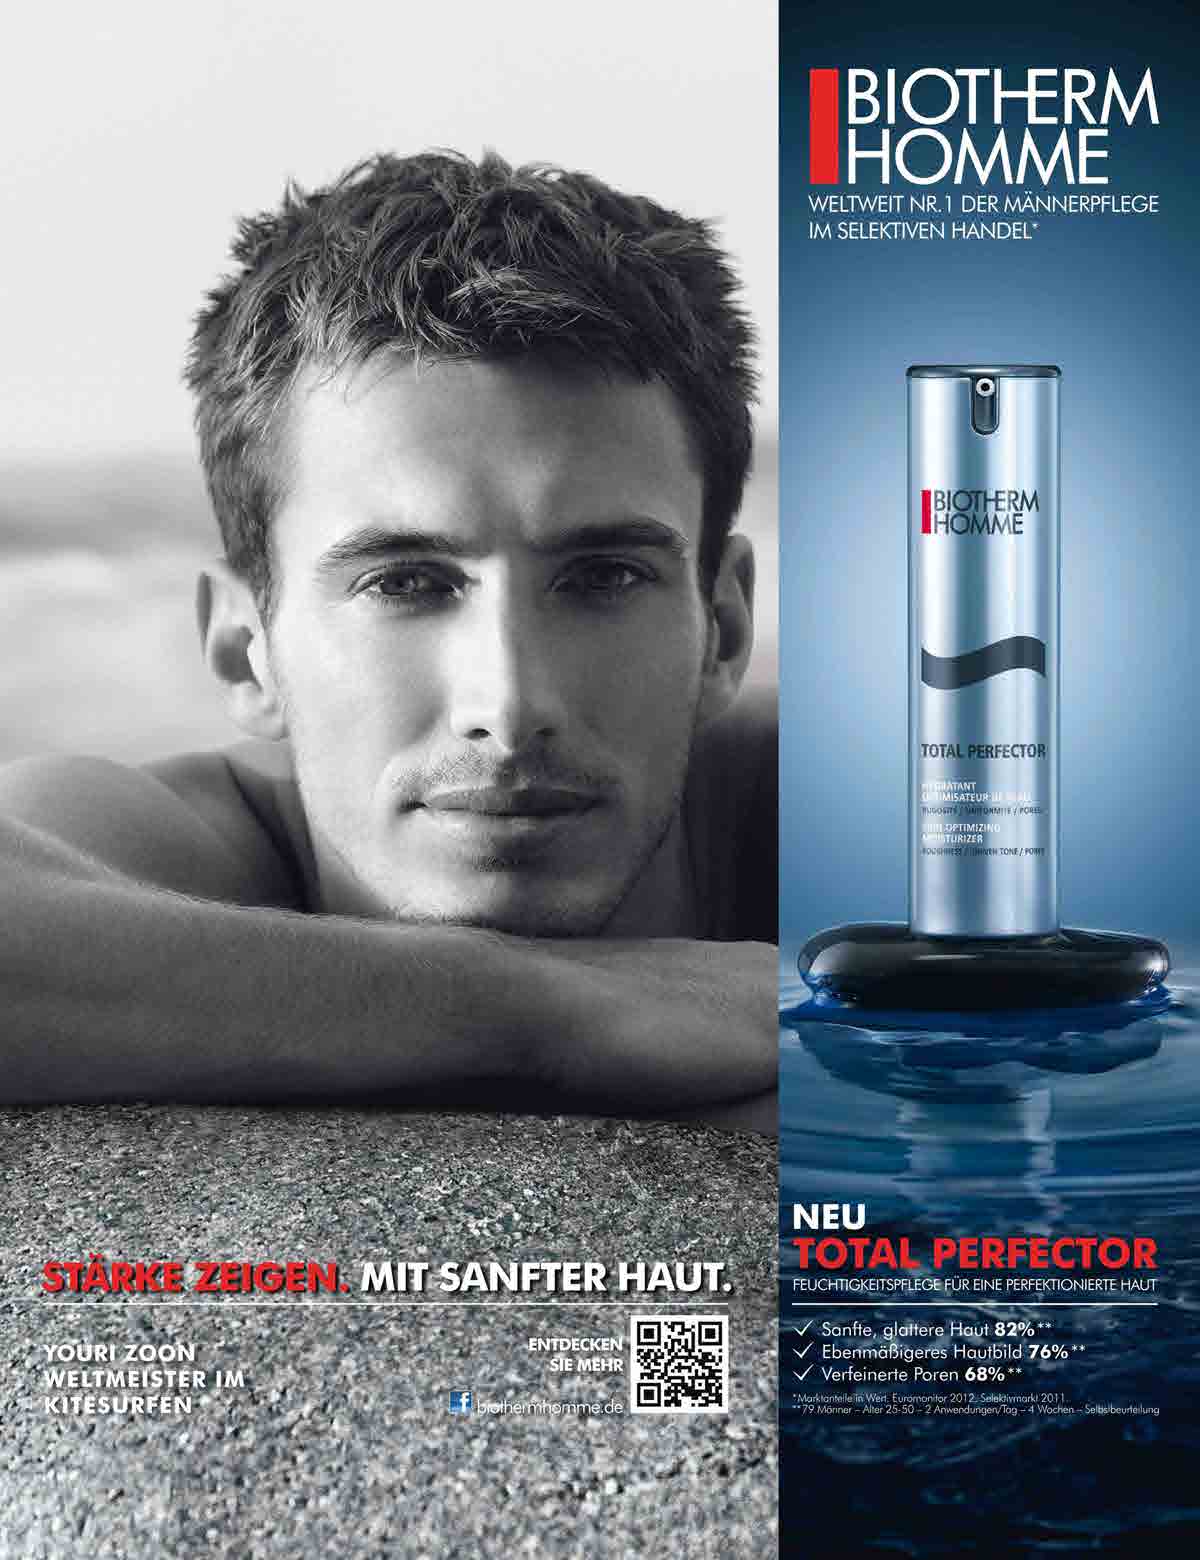 Cursus Kreek IJver The Essentialist - Fashion Advertising Updated Daily: Biotherm Homme Ad  Campaign Spring/Summer 2013